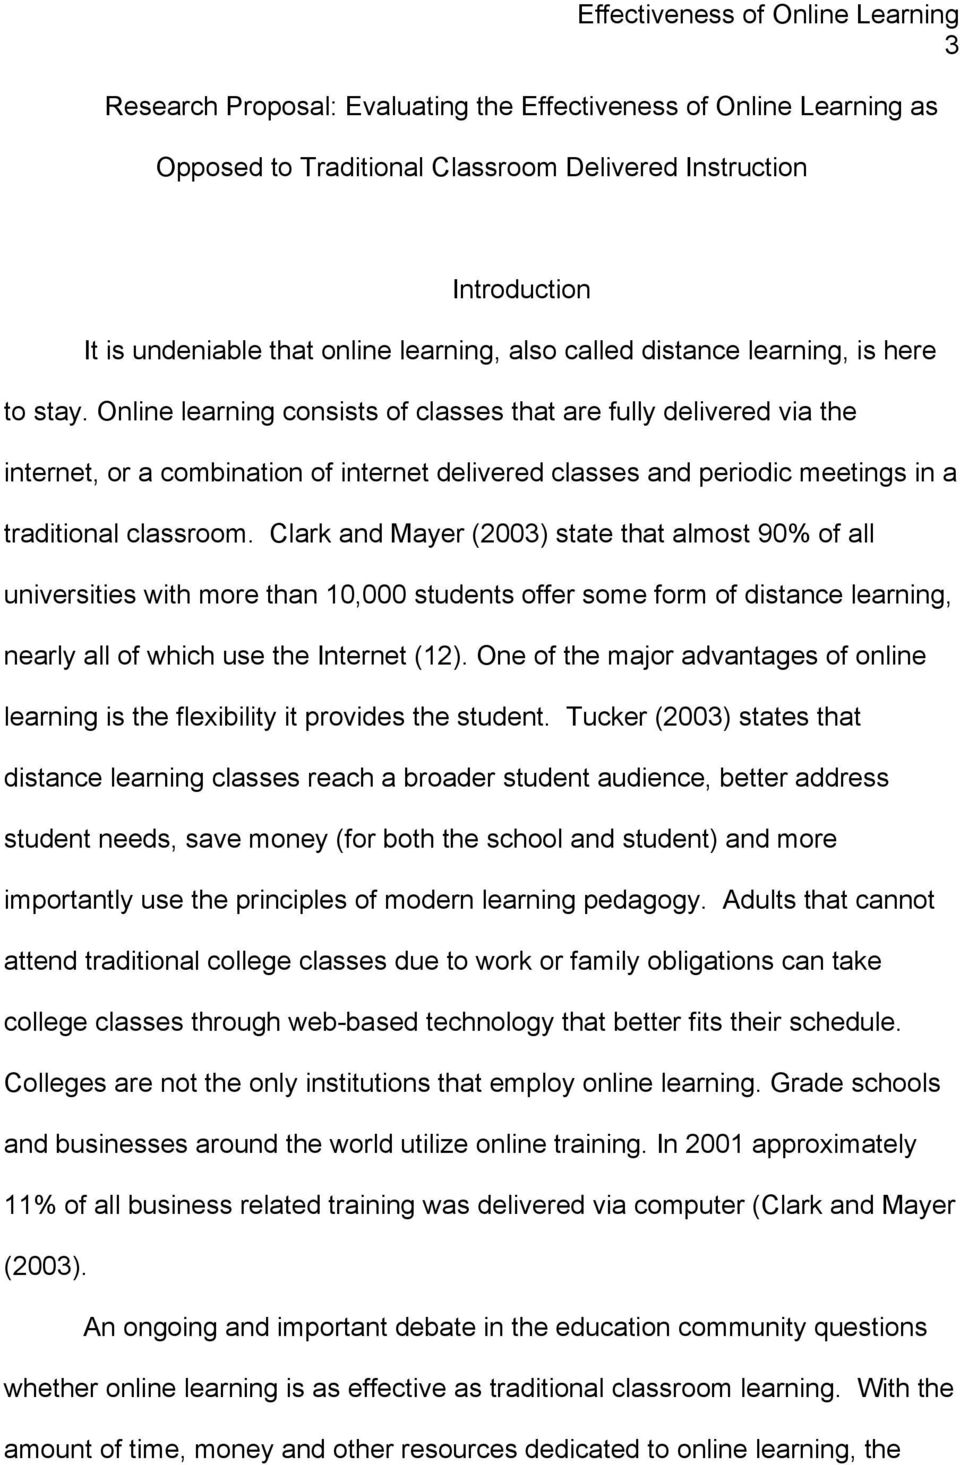 Research Proposal Evaluating The Effectiveness Of Online Learning As Opposed To Traditional Classroom Delivered Instruction Mark R Pdf Free Download